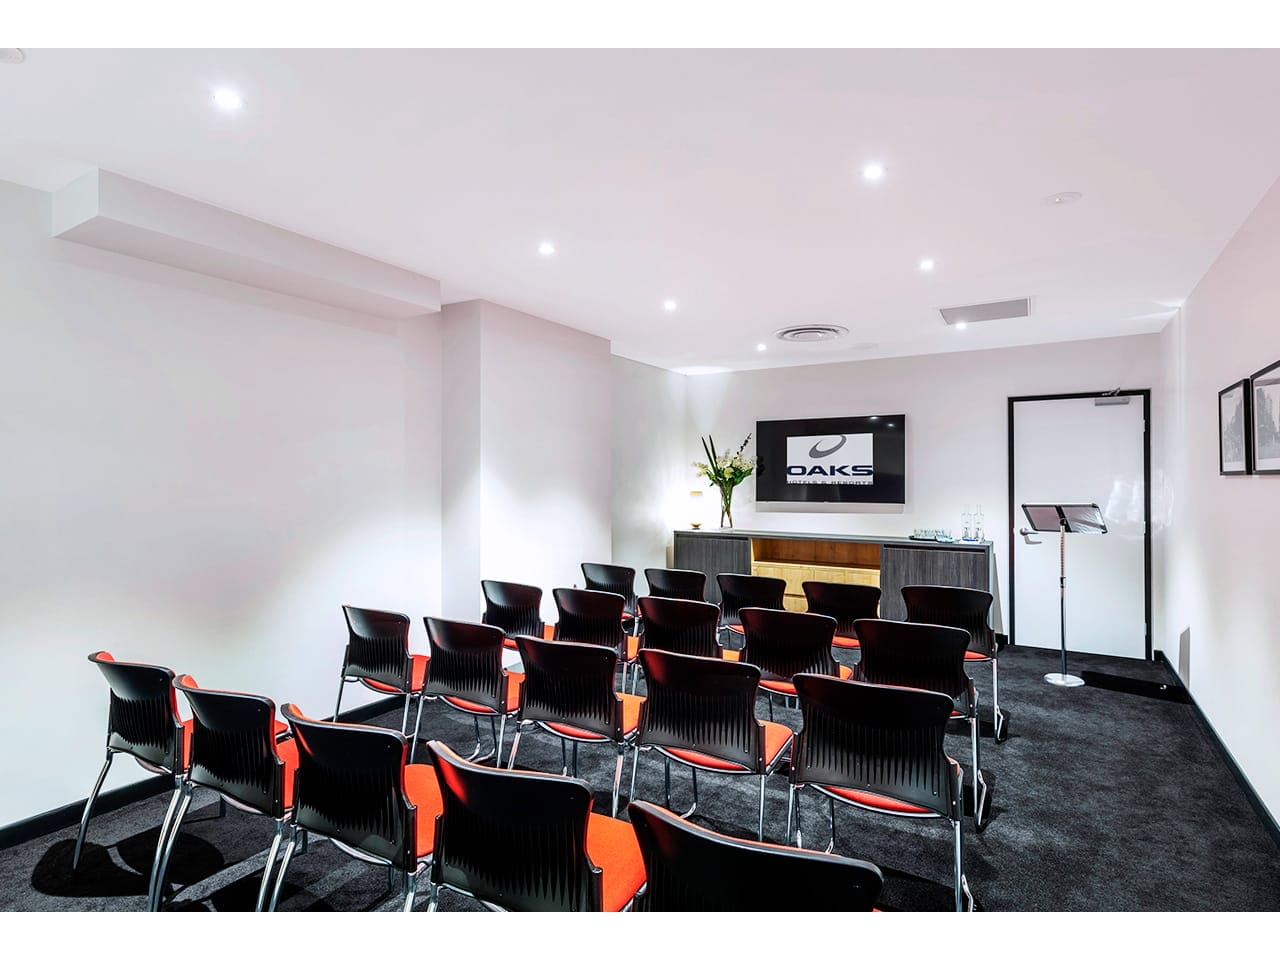 Small space hire for conference